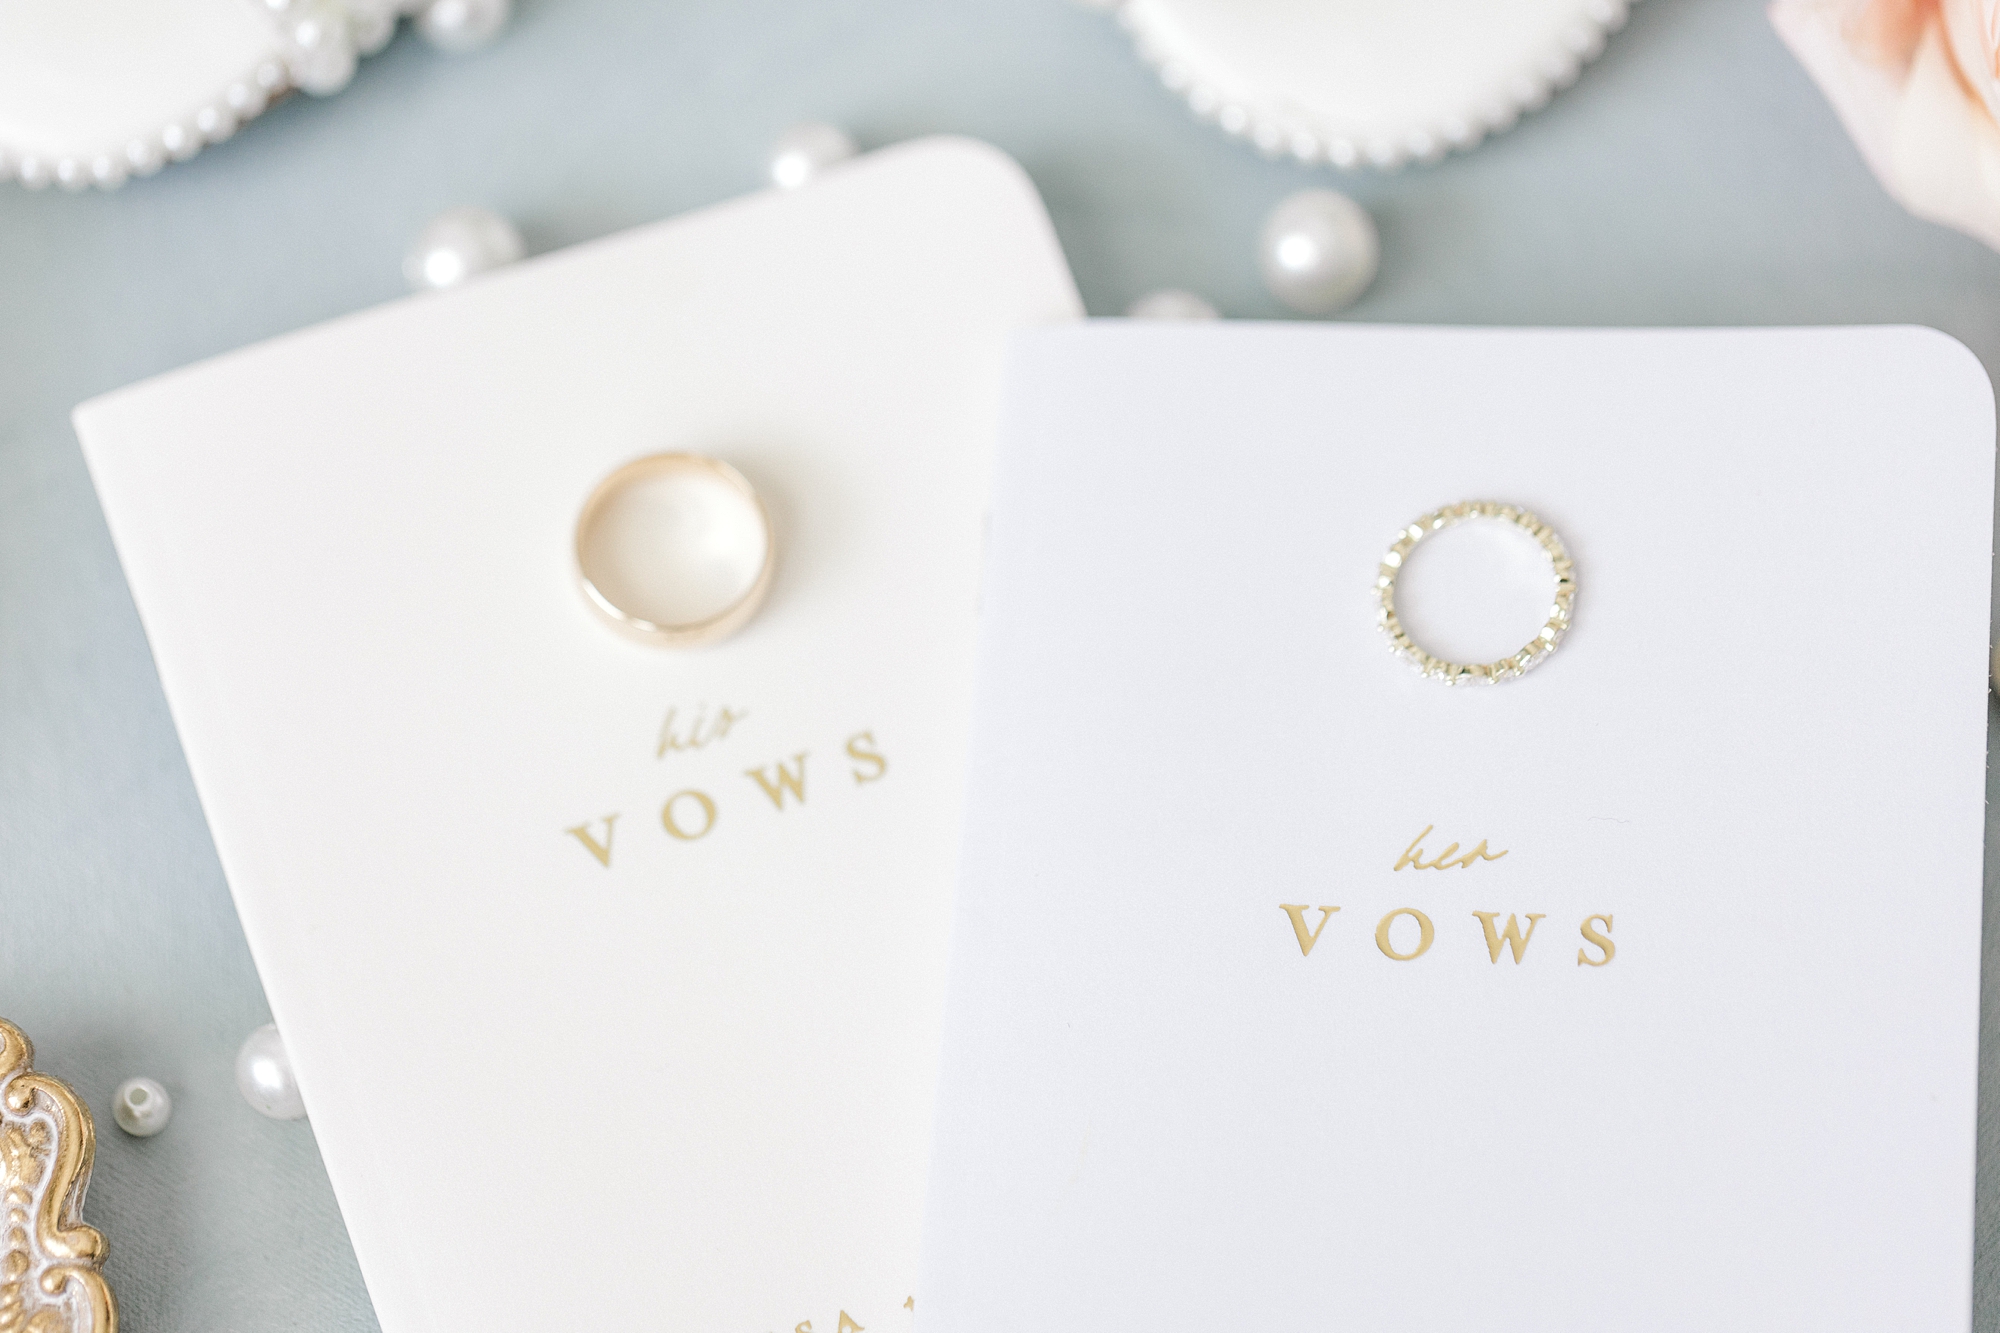 gold wedding rings lay on white vow booklets